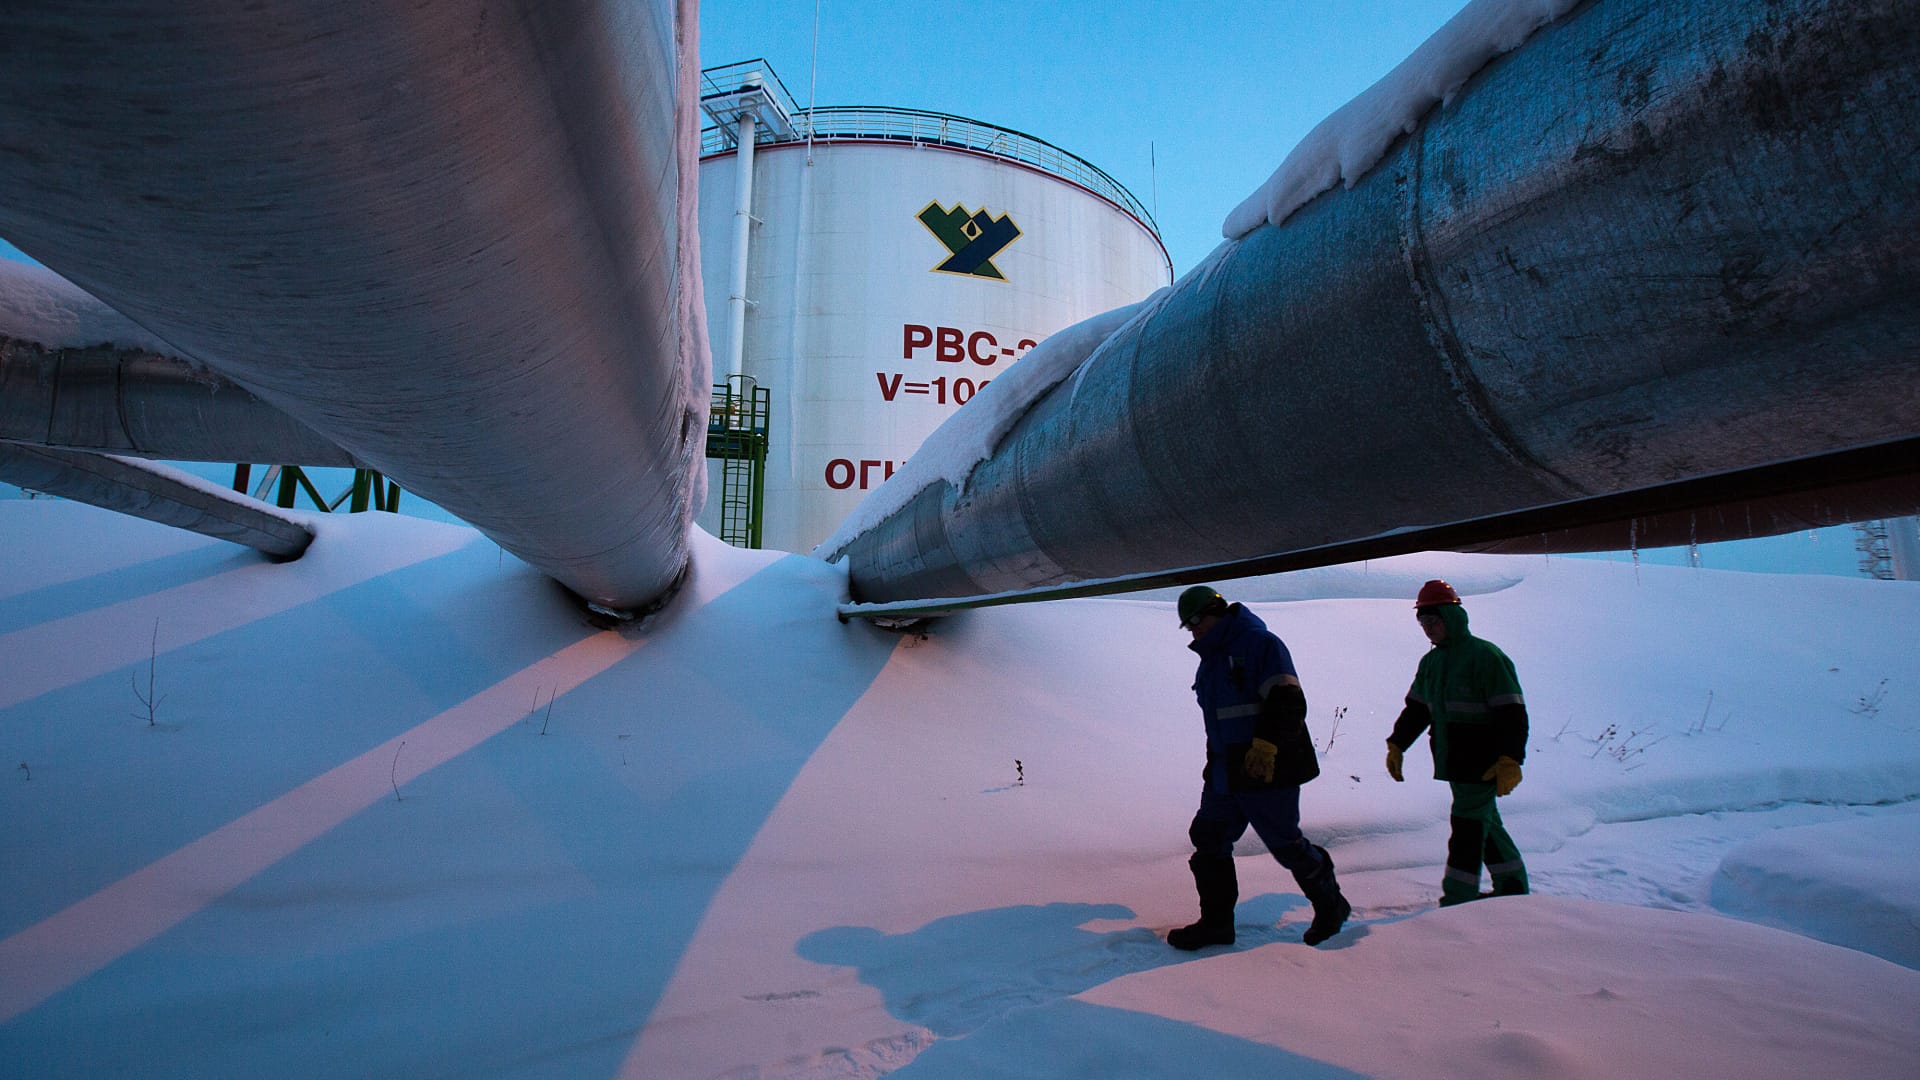 Employees pass beneath pipes leading to oil storage tanks at the central processing plant for oil and gas at the Salym Petroleum Development oil fields near the Bazhenov shale formation in Salym, Russia.